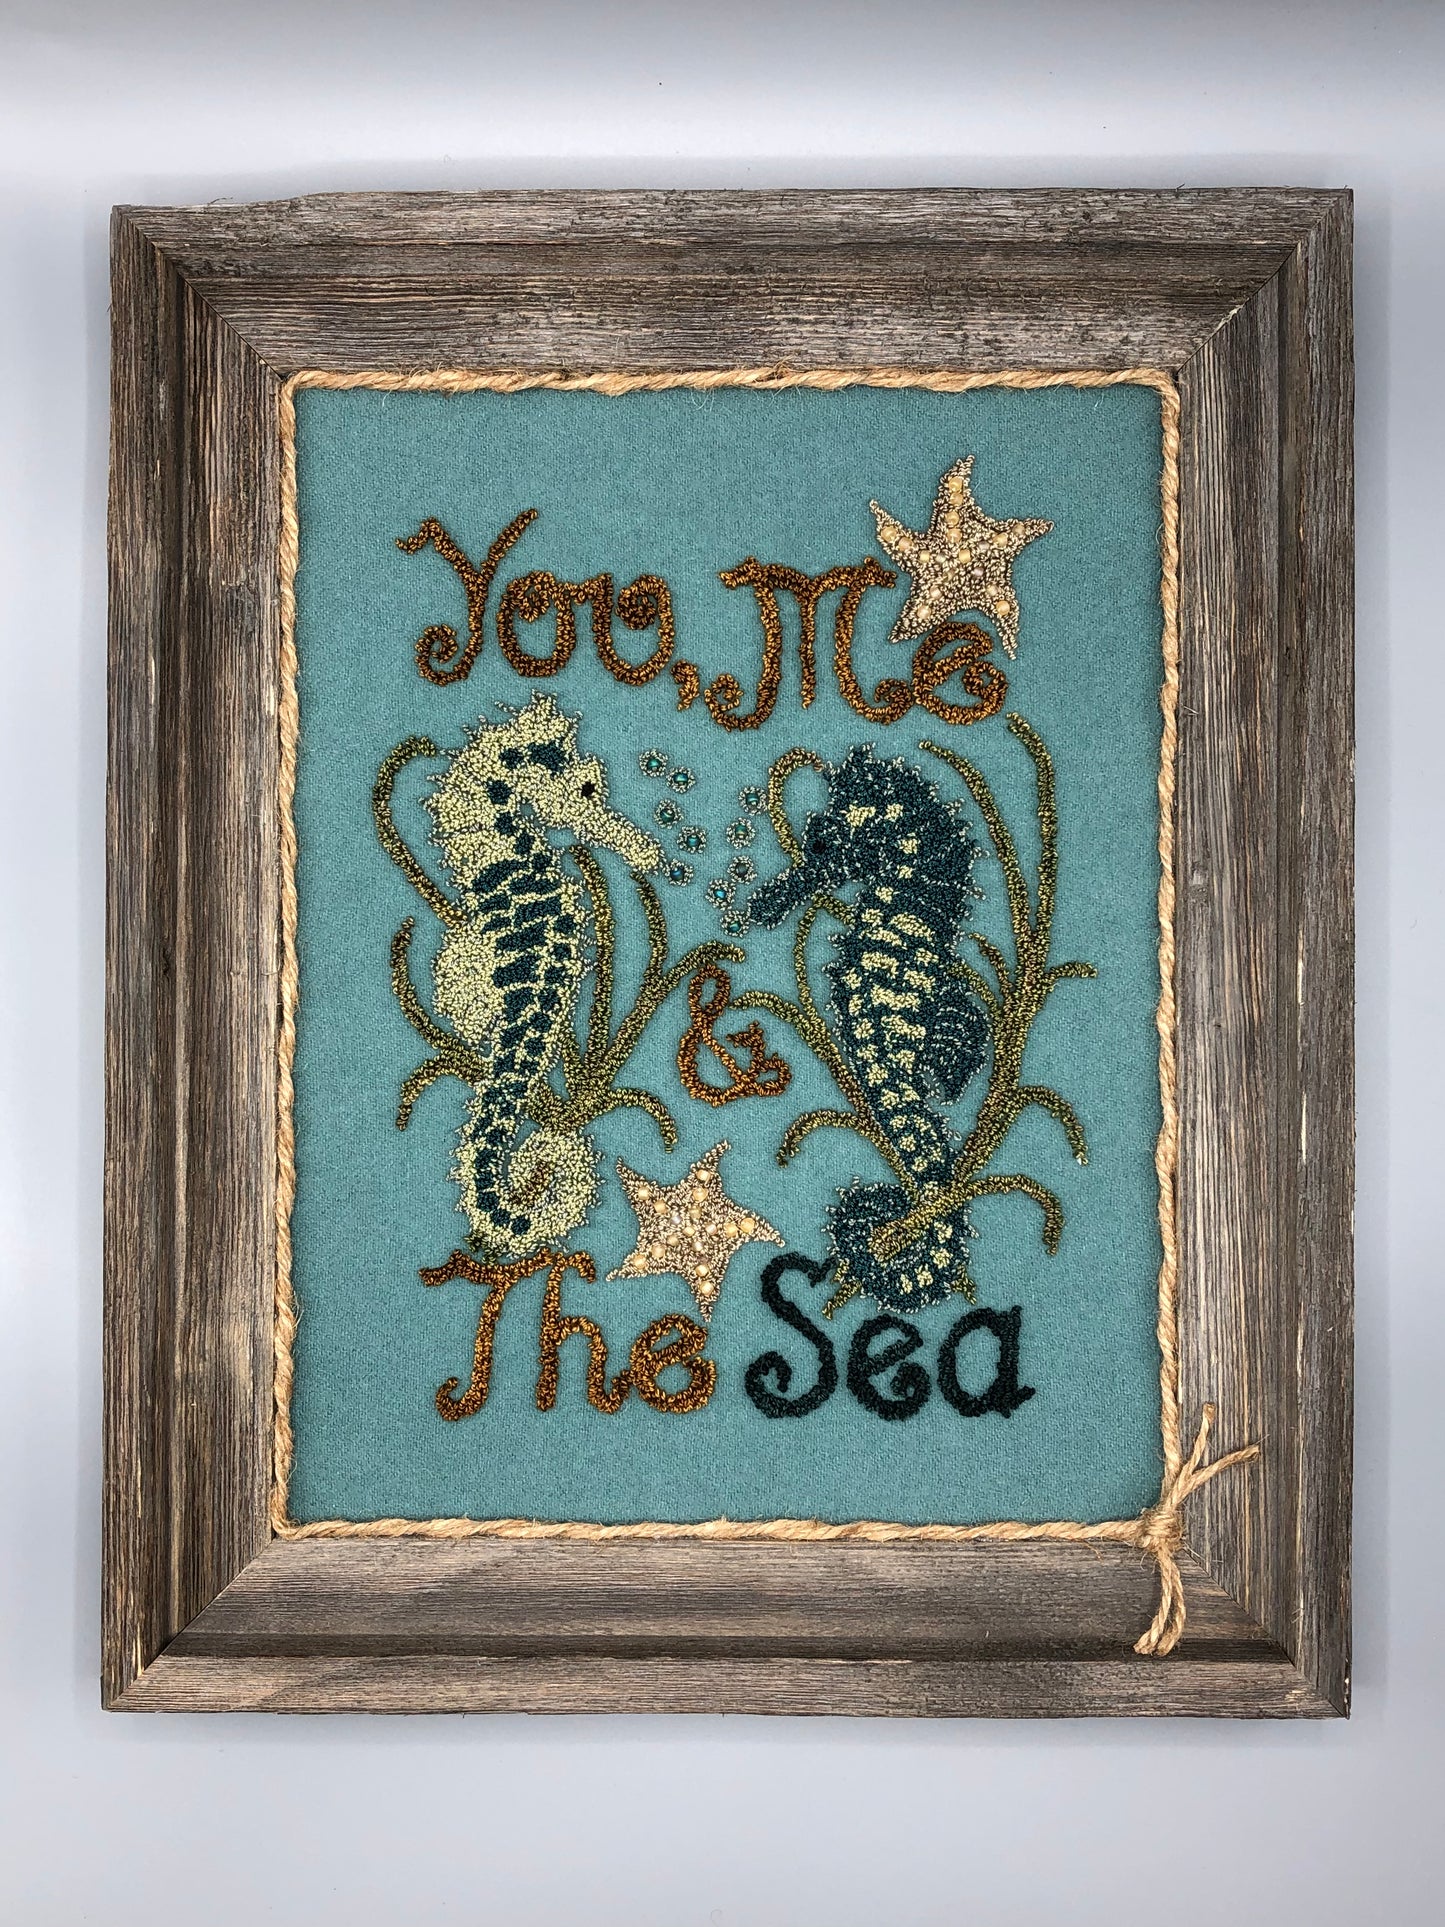 You, Me & The Sea -Punch Needle Pattern by Orphaned Wool.  This wonderful undersea pattern is available as a Paper Pattern or a Pattern on Weaver's Cloth fabric.  This design shown used wool fabric as the background but you can use thread to also create the background. 